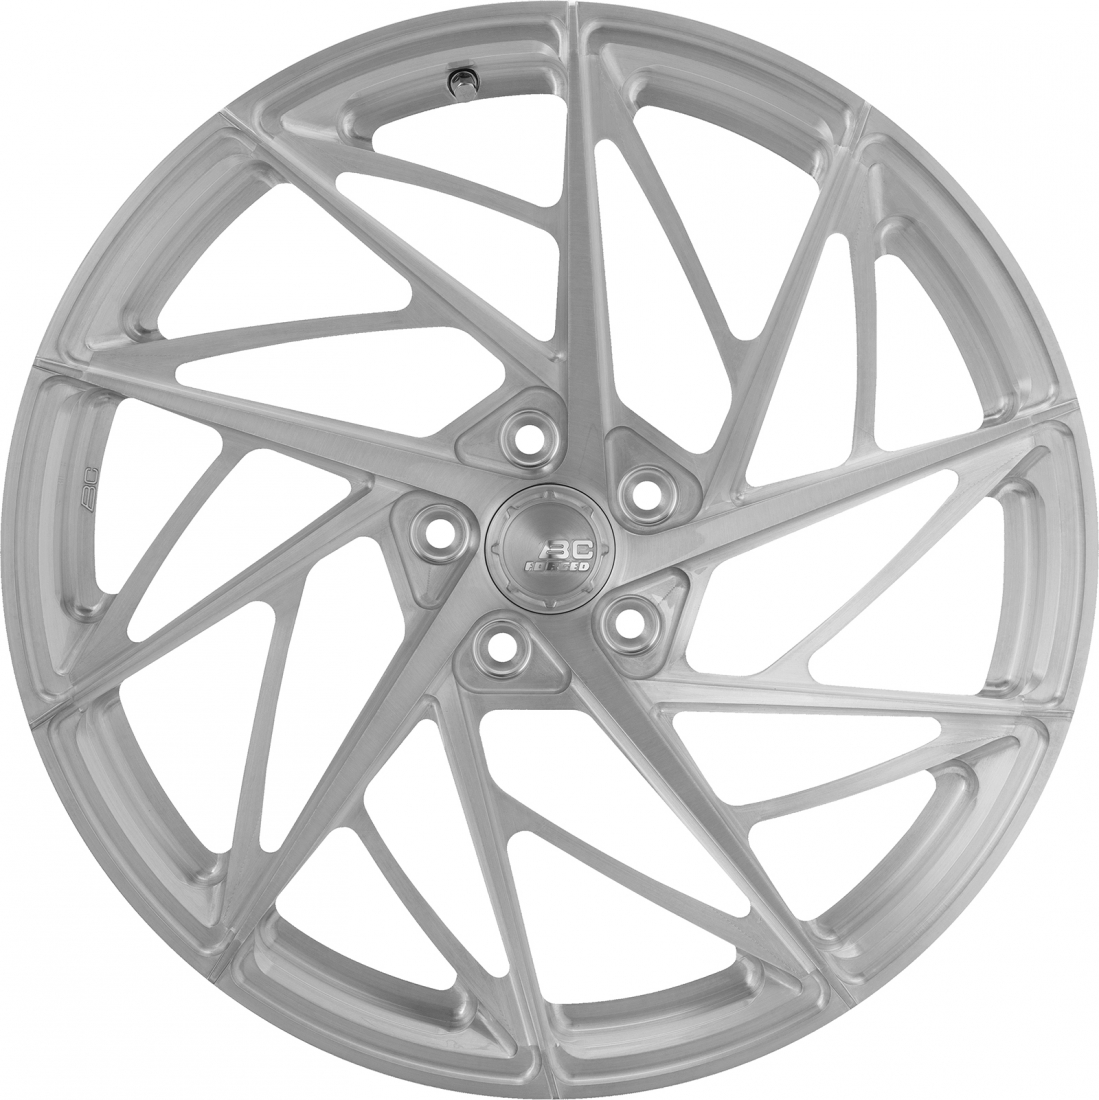 2020-23 BC Forged EH351 Wheels for C8 Corvette, Set of 4